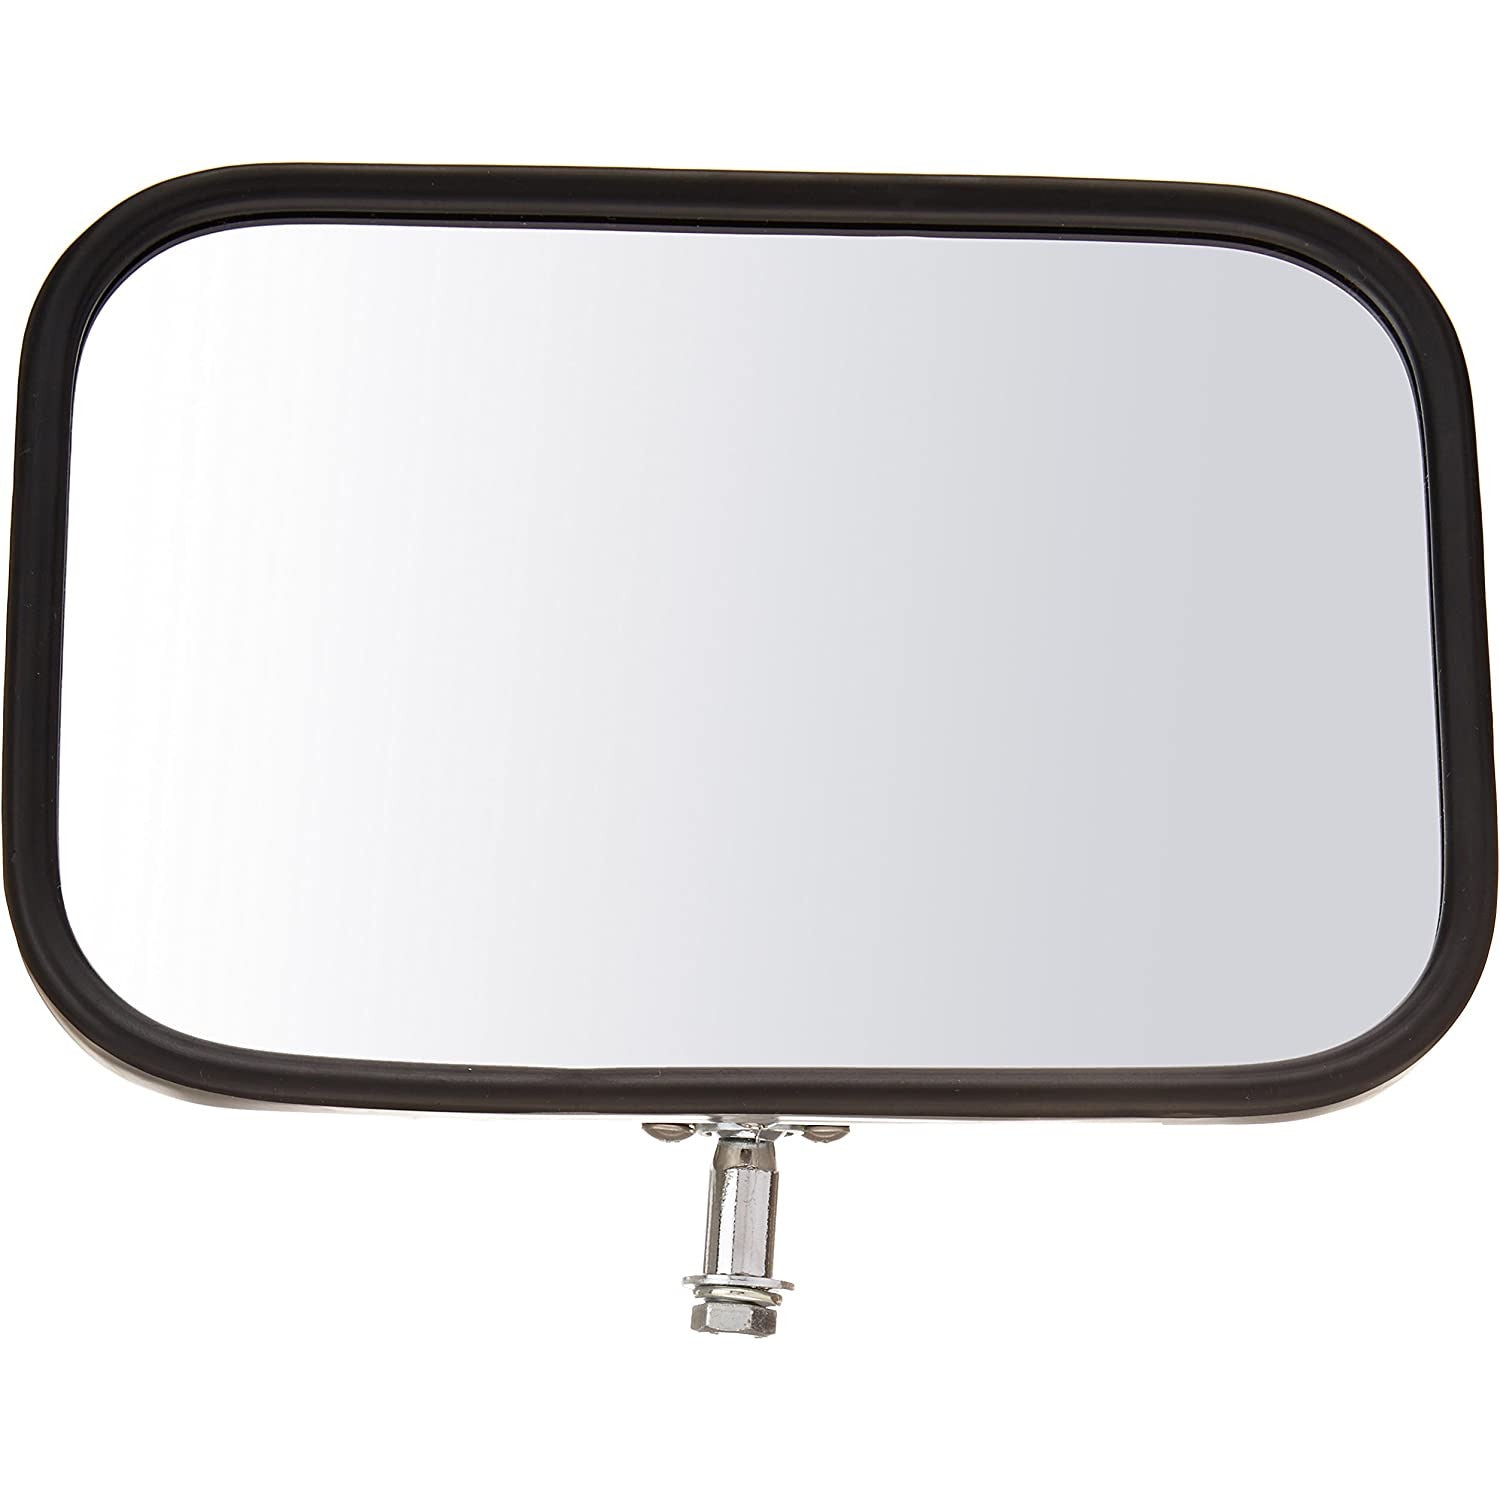 LTG 12193-5 Grote OEM-Style 50" Wide-View Mirror